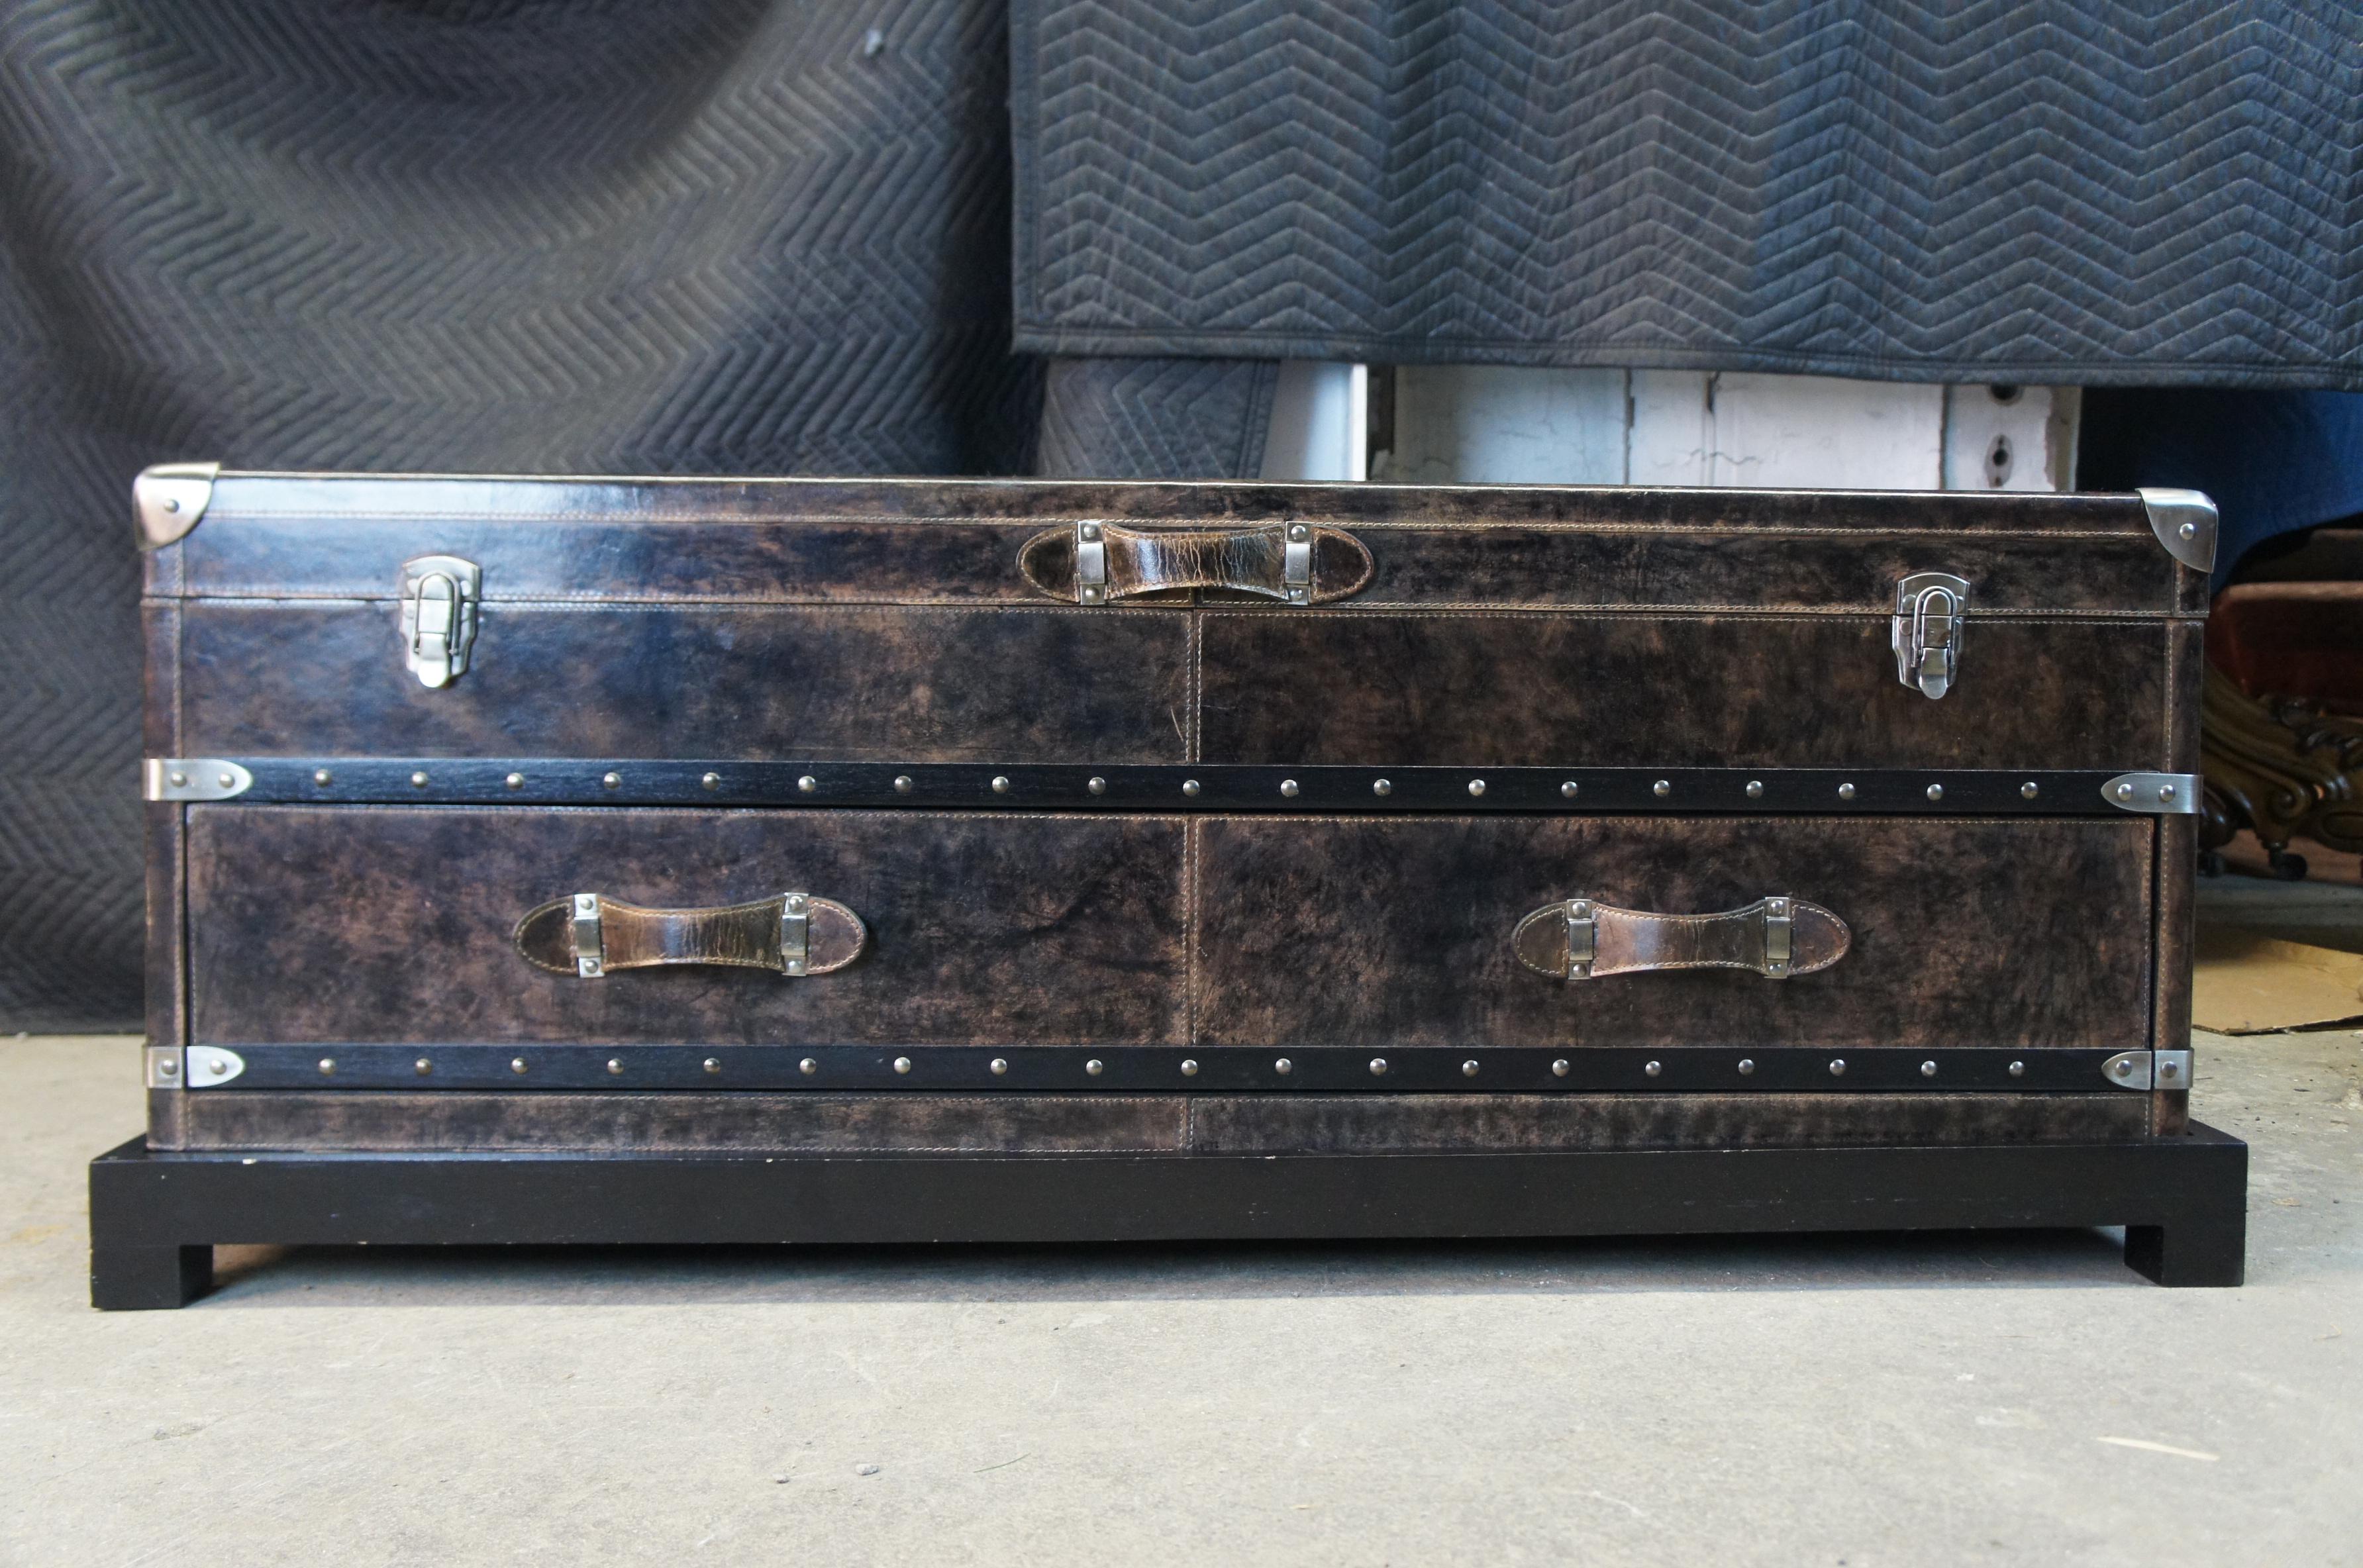 Arhaus Martin Leather Steamer Trunk Coffee Cocktail Table with Drawers on Stand  1